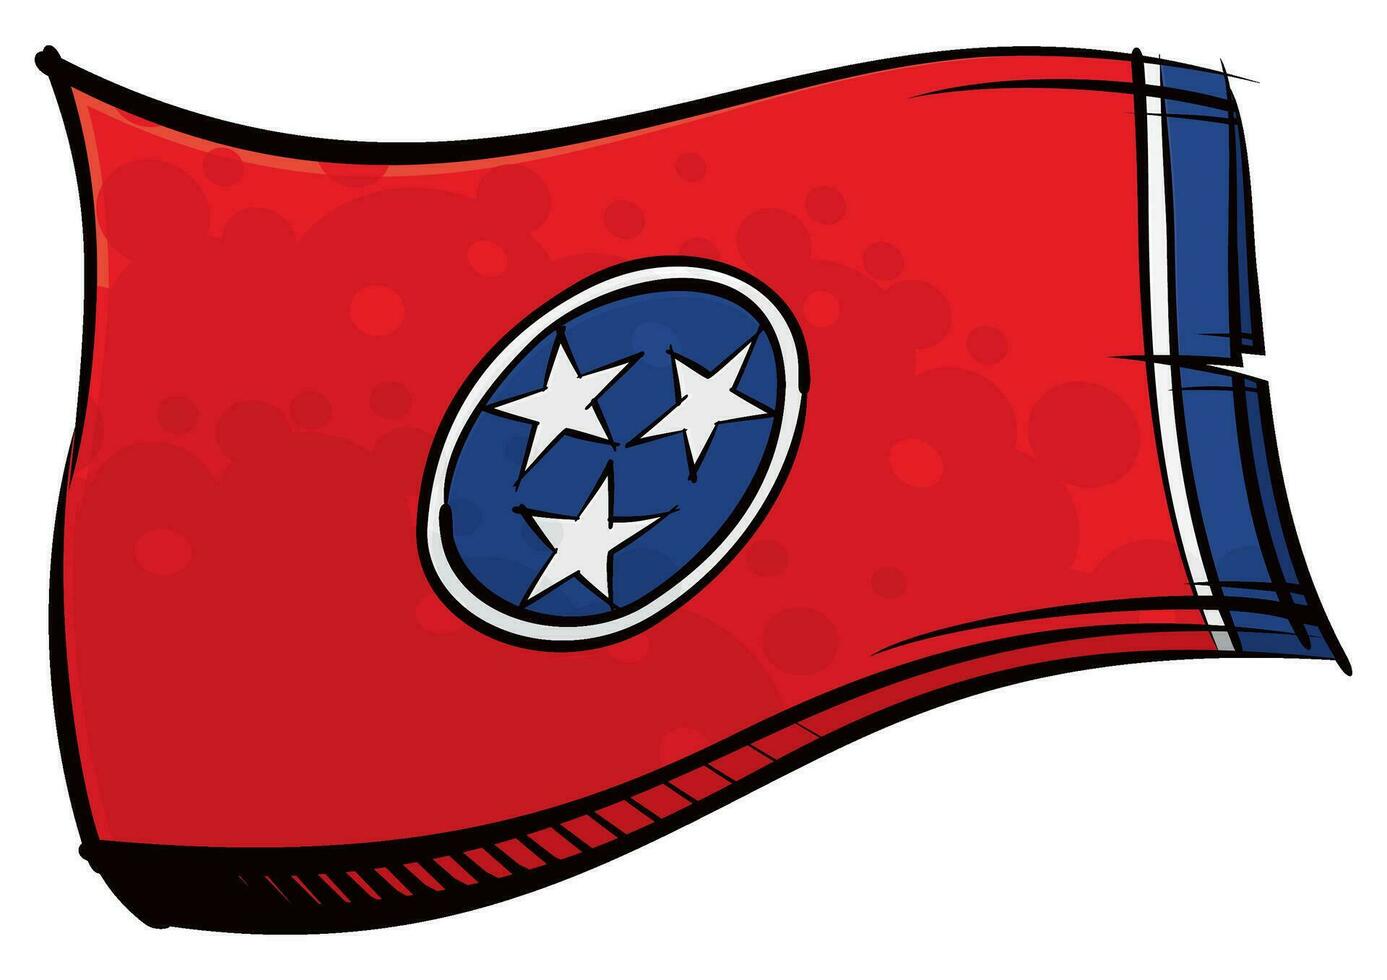 Painted Tennessee flag waving in wind vector